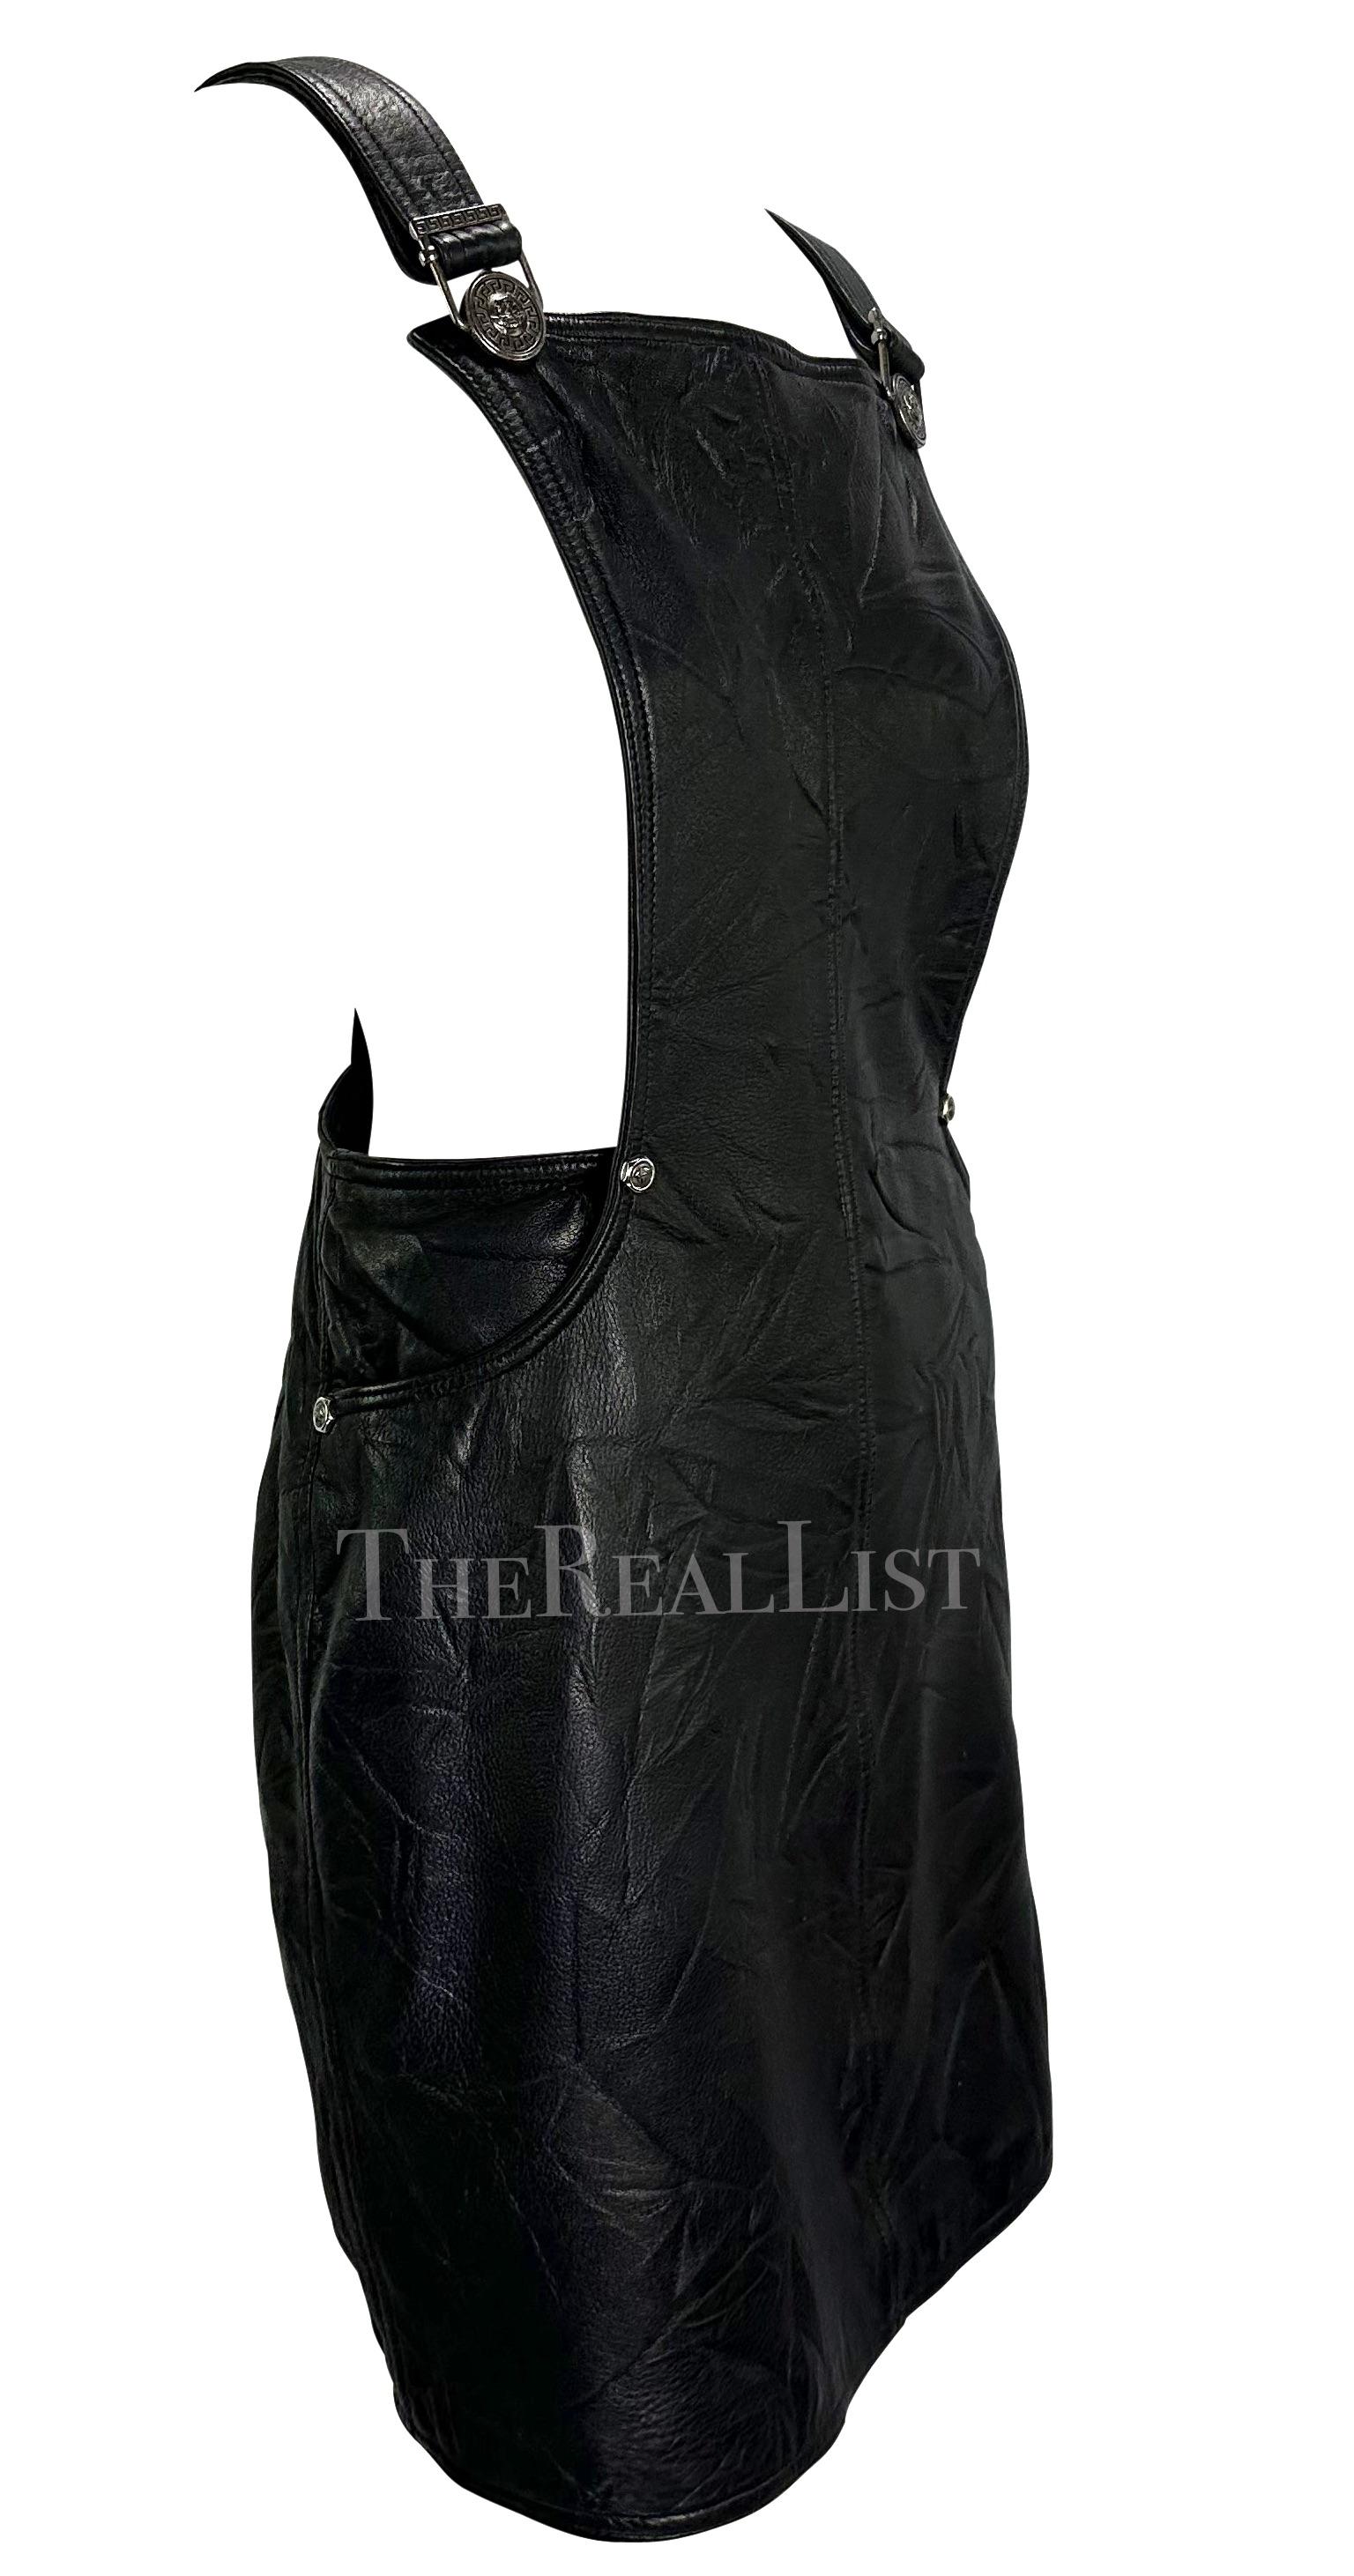 F/W 1994 Gianni Versace Black Wrinkled Leather Medusa Overall Mini Dress In Excellent Condition For Sale In West Hollywood, CA